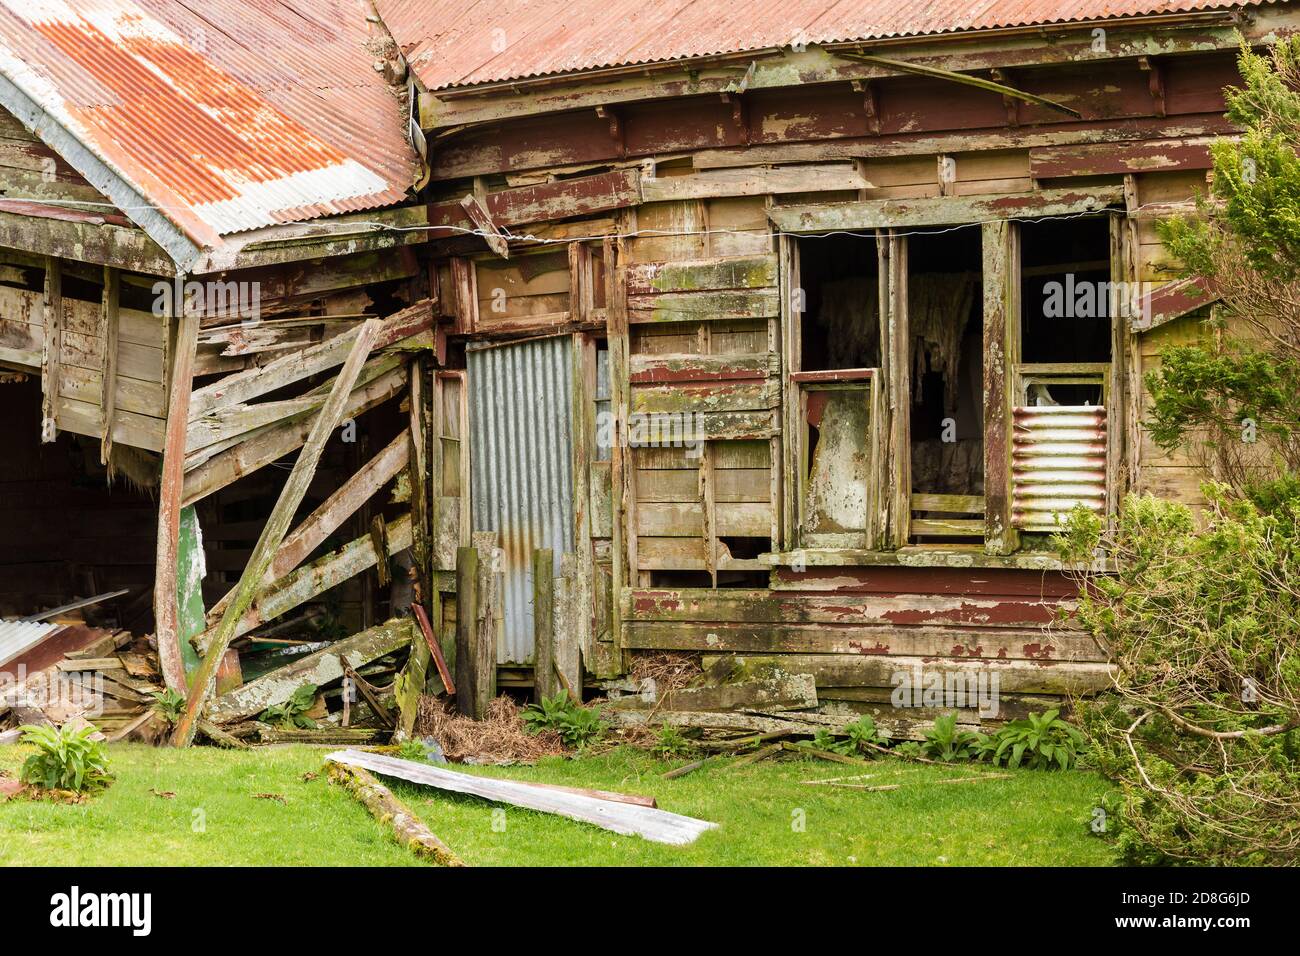 A long-abandoned, collapsing wooden and corrugated iron farmhouse. Photographed in New Zealand Stock Photo